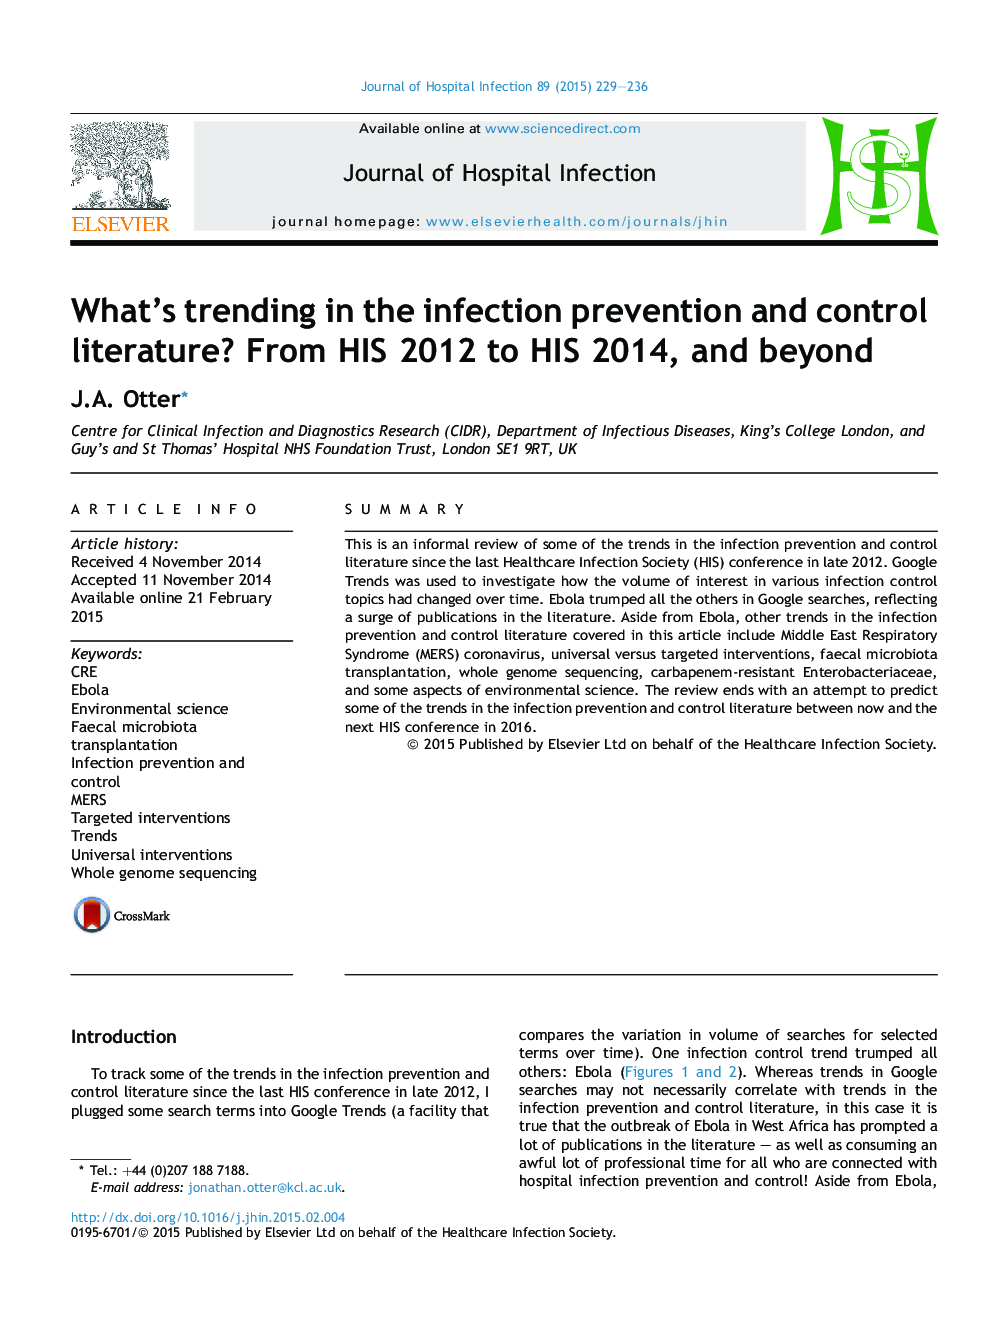 What's trending in the infection prevention and control literature? From HIS 2012 to HIS 2014, and beyond